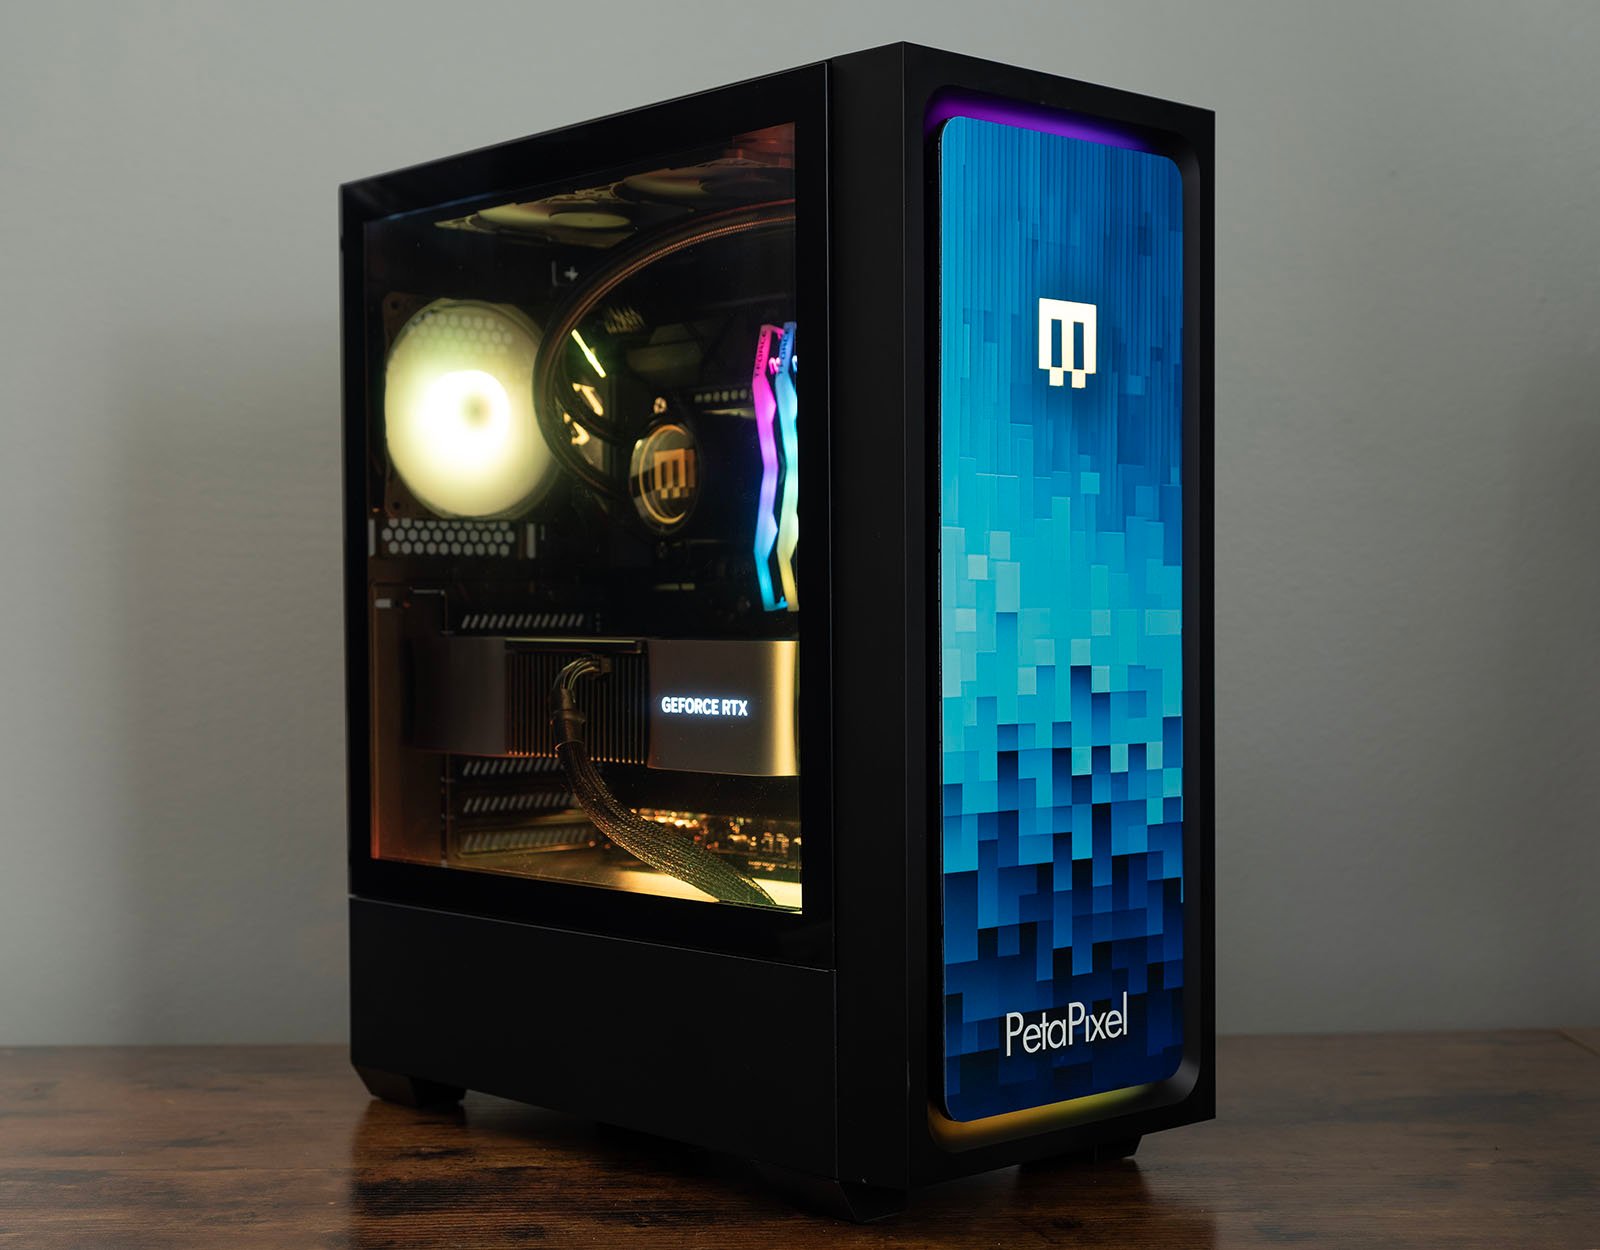 A black desktop computer tower with a transparent side panel revealing internal components, including a GeForce RTX graphics card. The front panel has a blue pixelated design with a white logo and "PetaPixel" text, illuminated with RGB lighting.